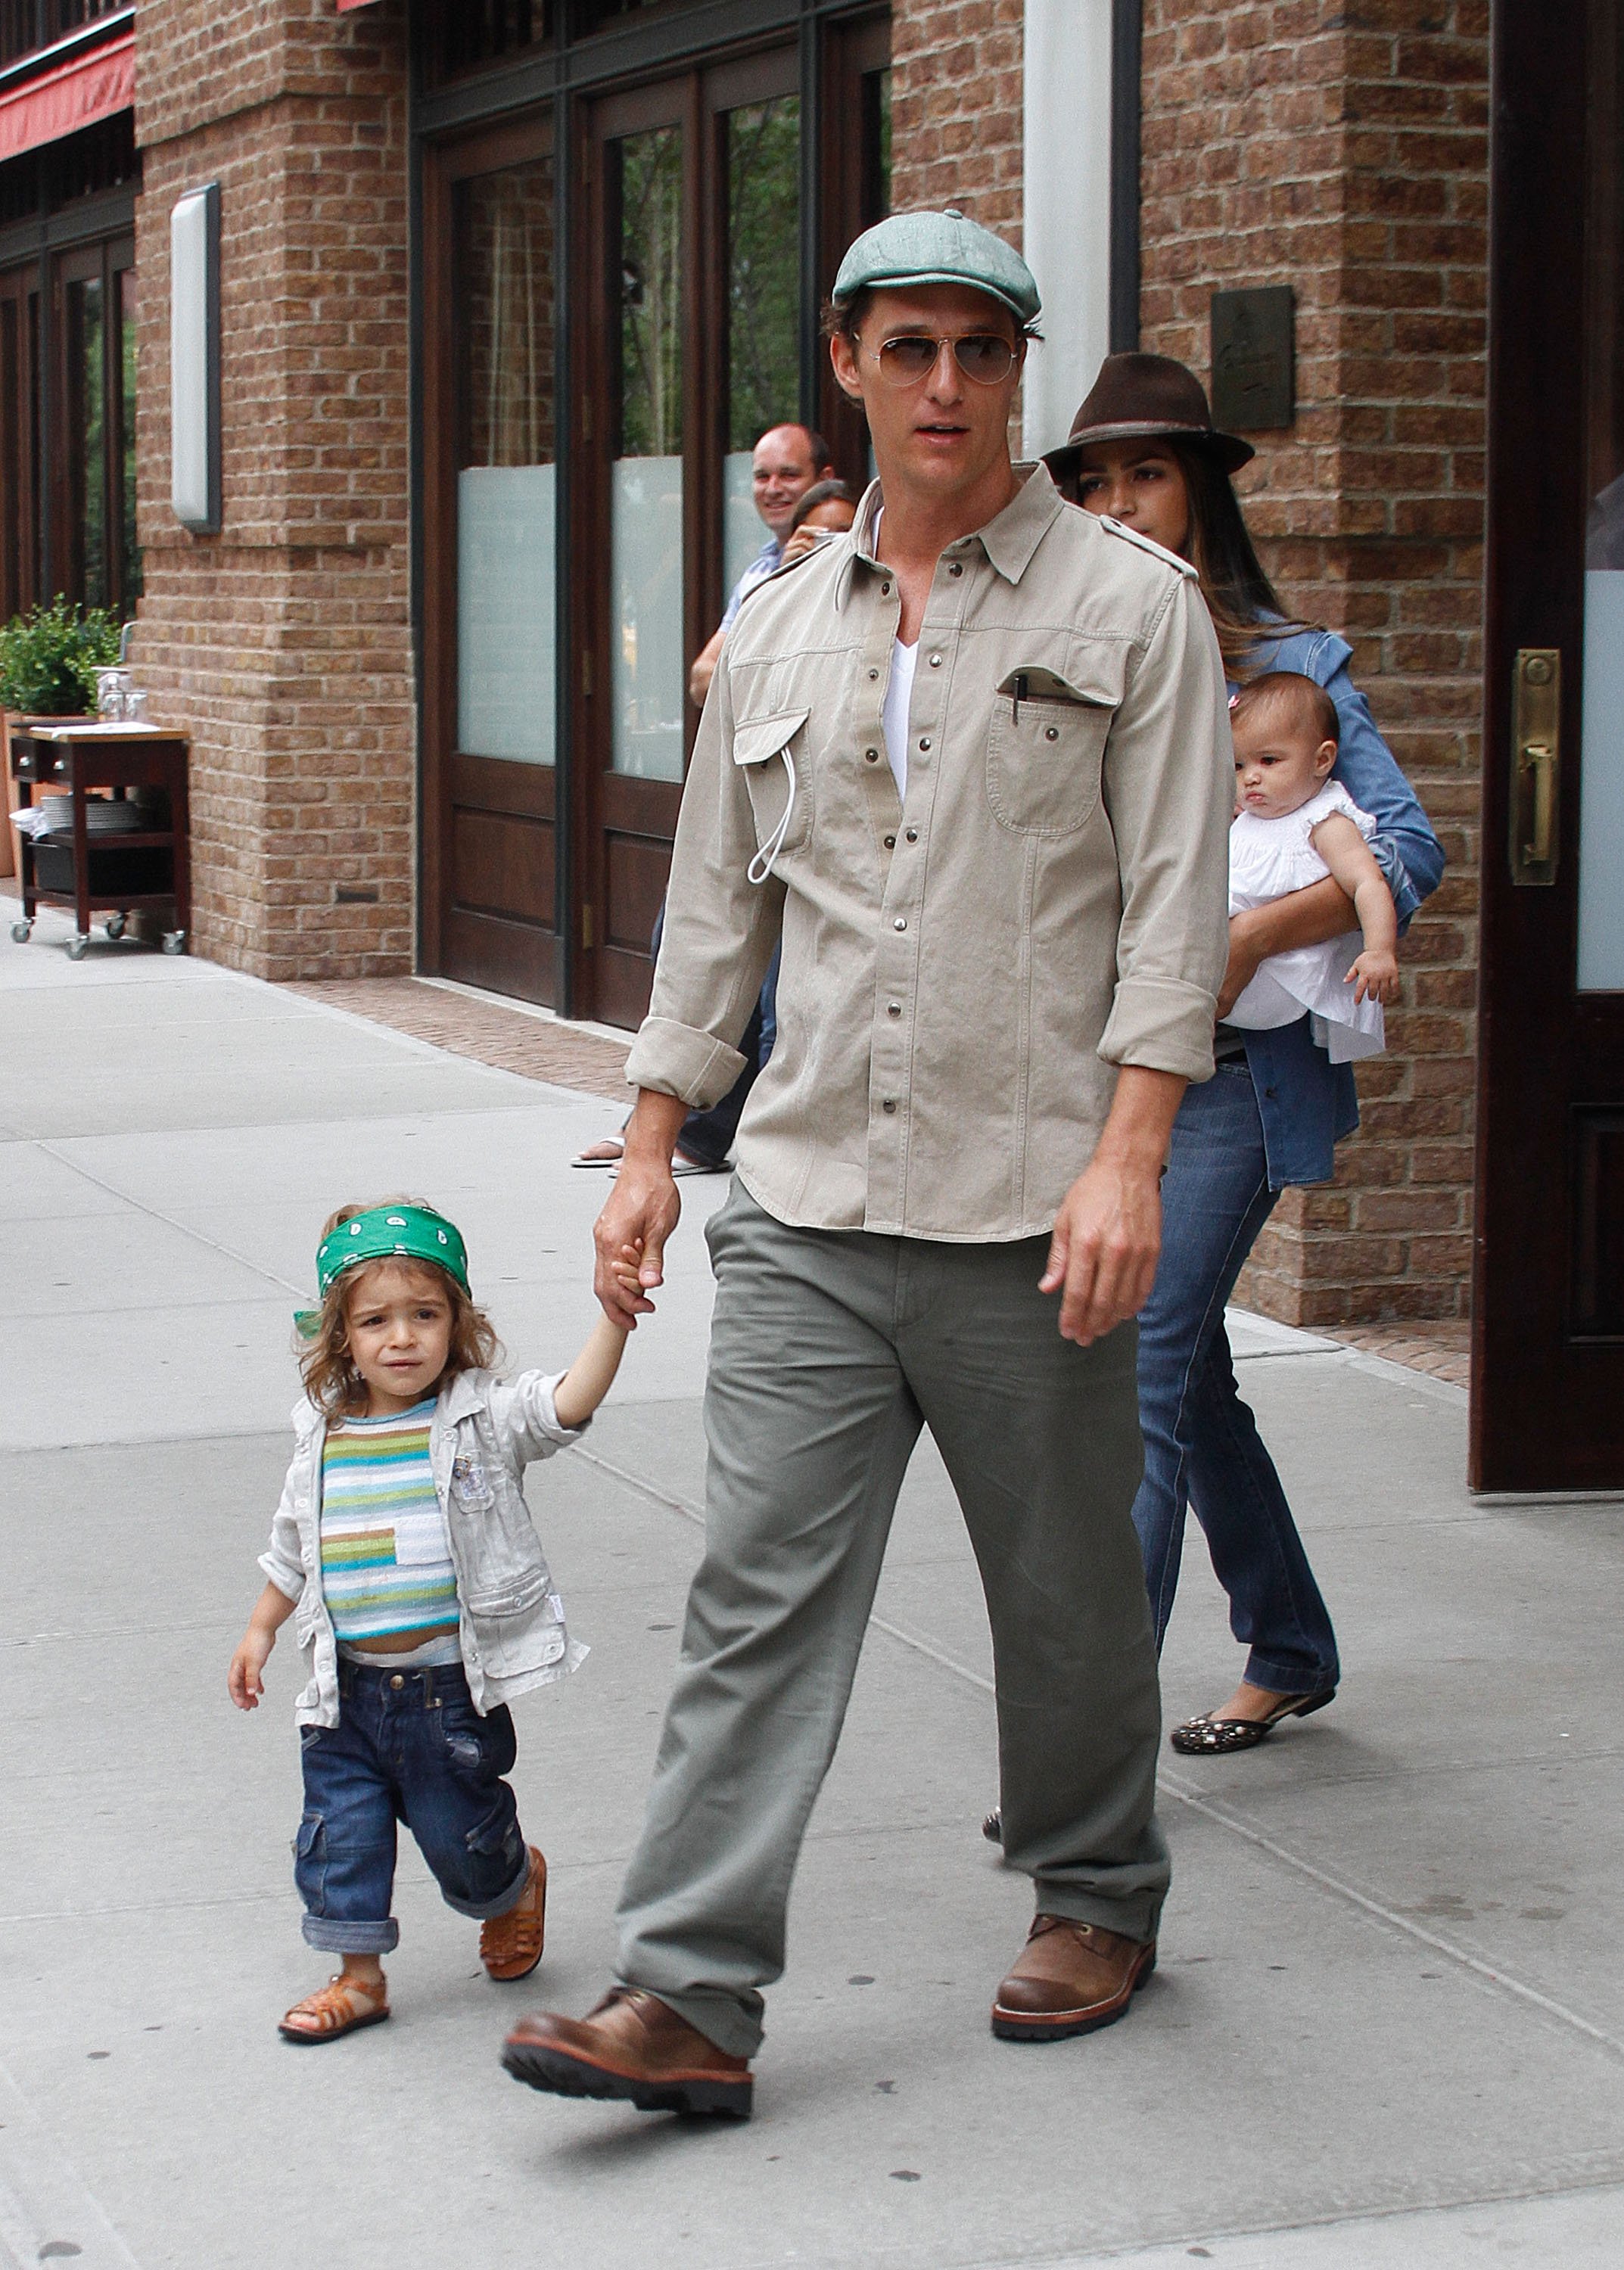 Matthew McConaughey, Camila Alves and their kids, Levi McConaughey and Vida McConaughey, in Tibeca on June 16, 2010 in New York, New York. | Source: Getty Images